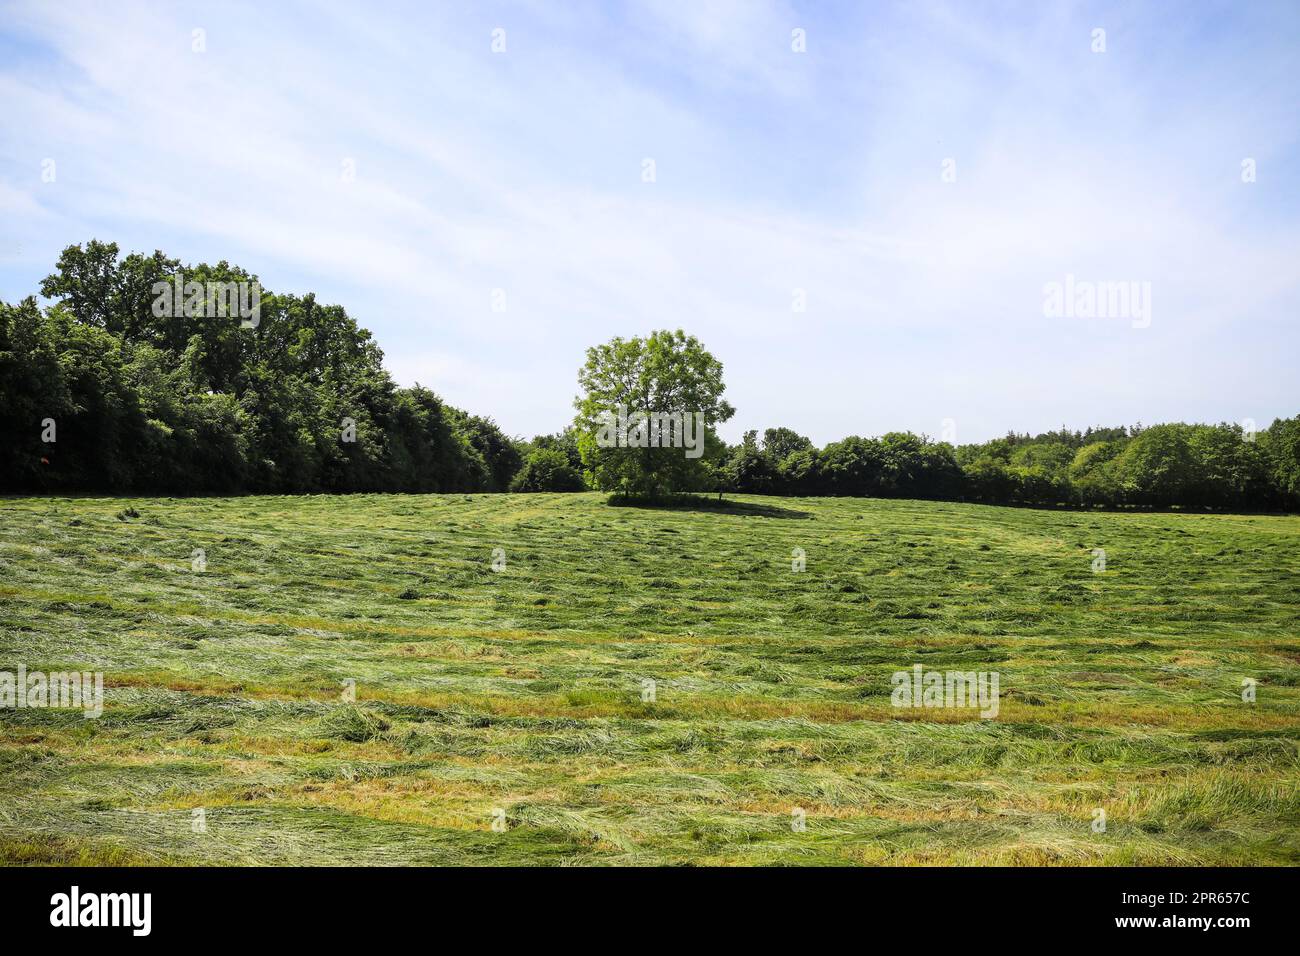 View of an agriculturally used field with green grass. Stock Photo